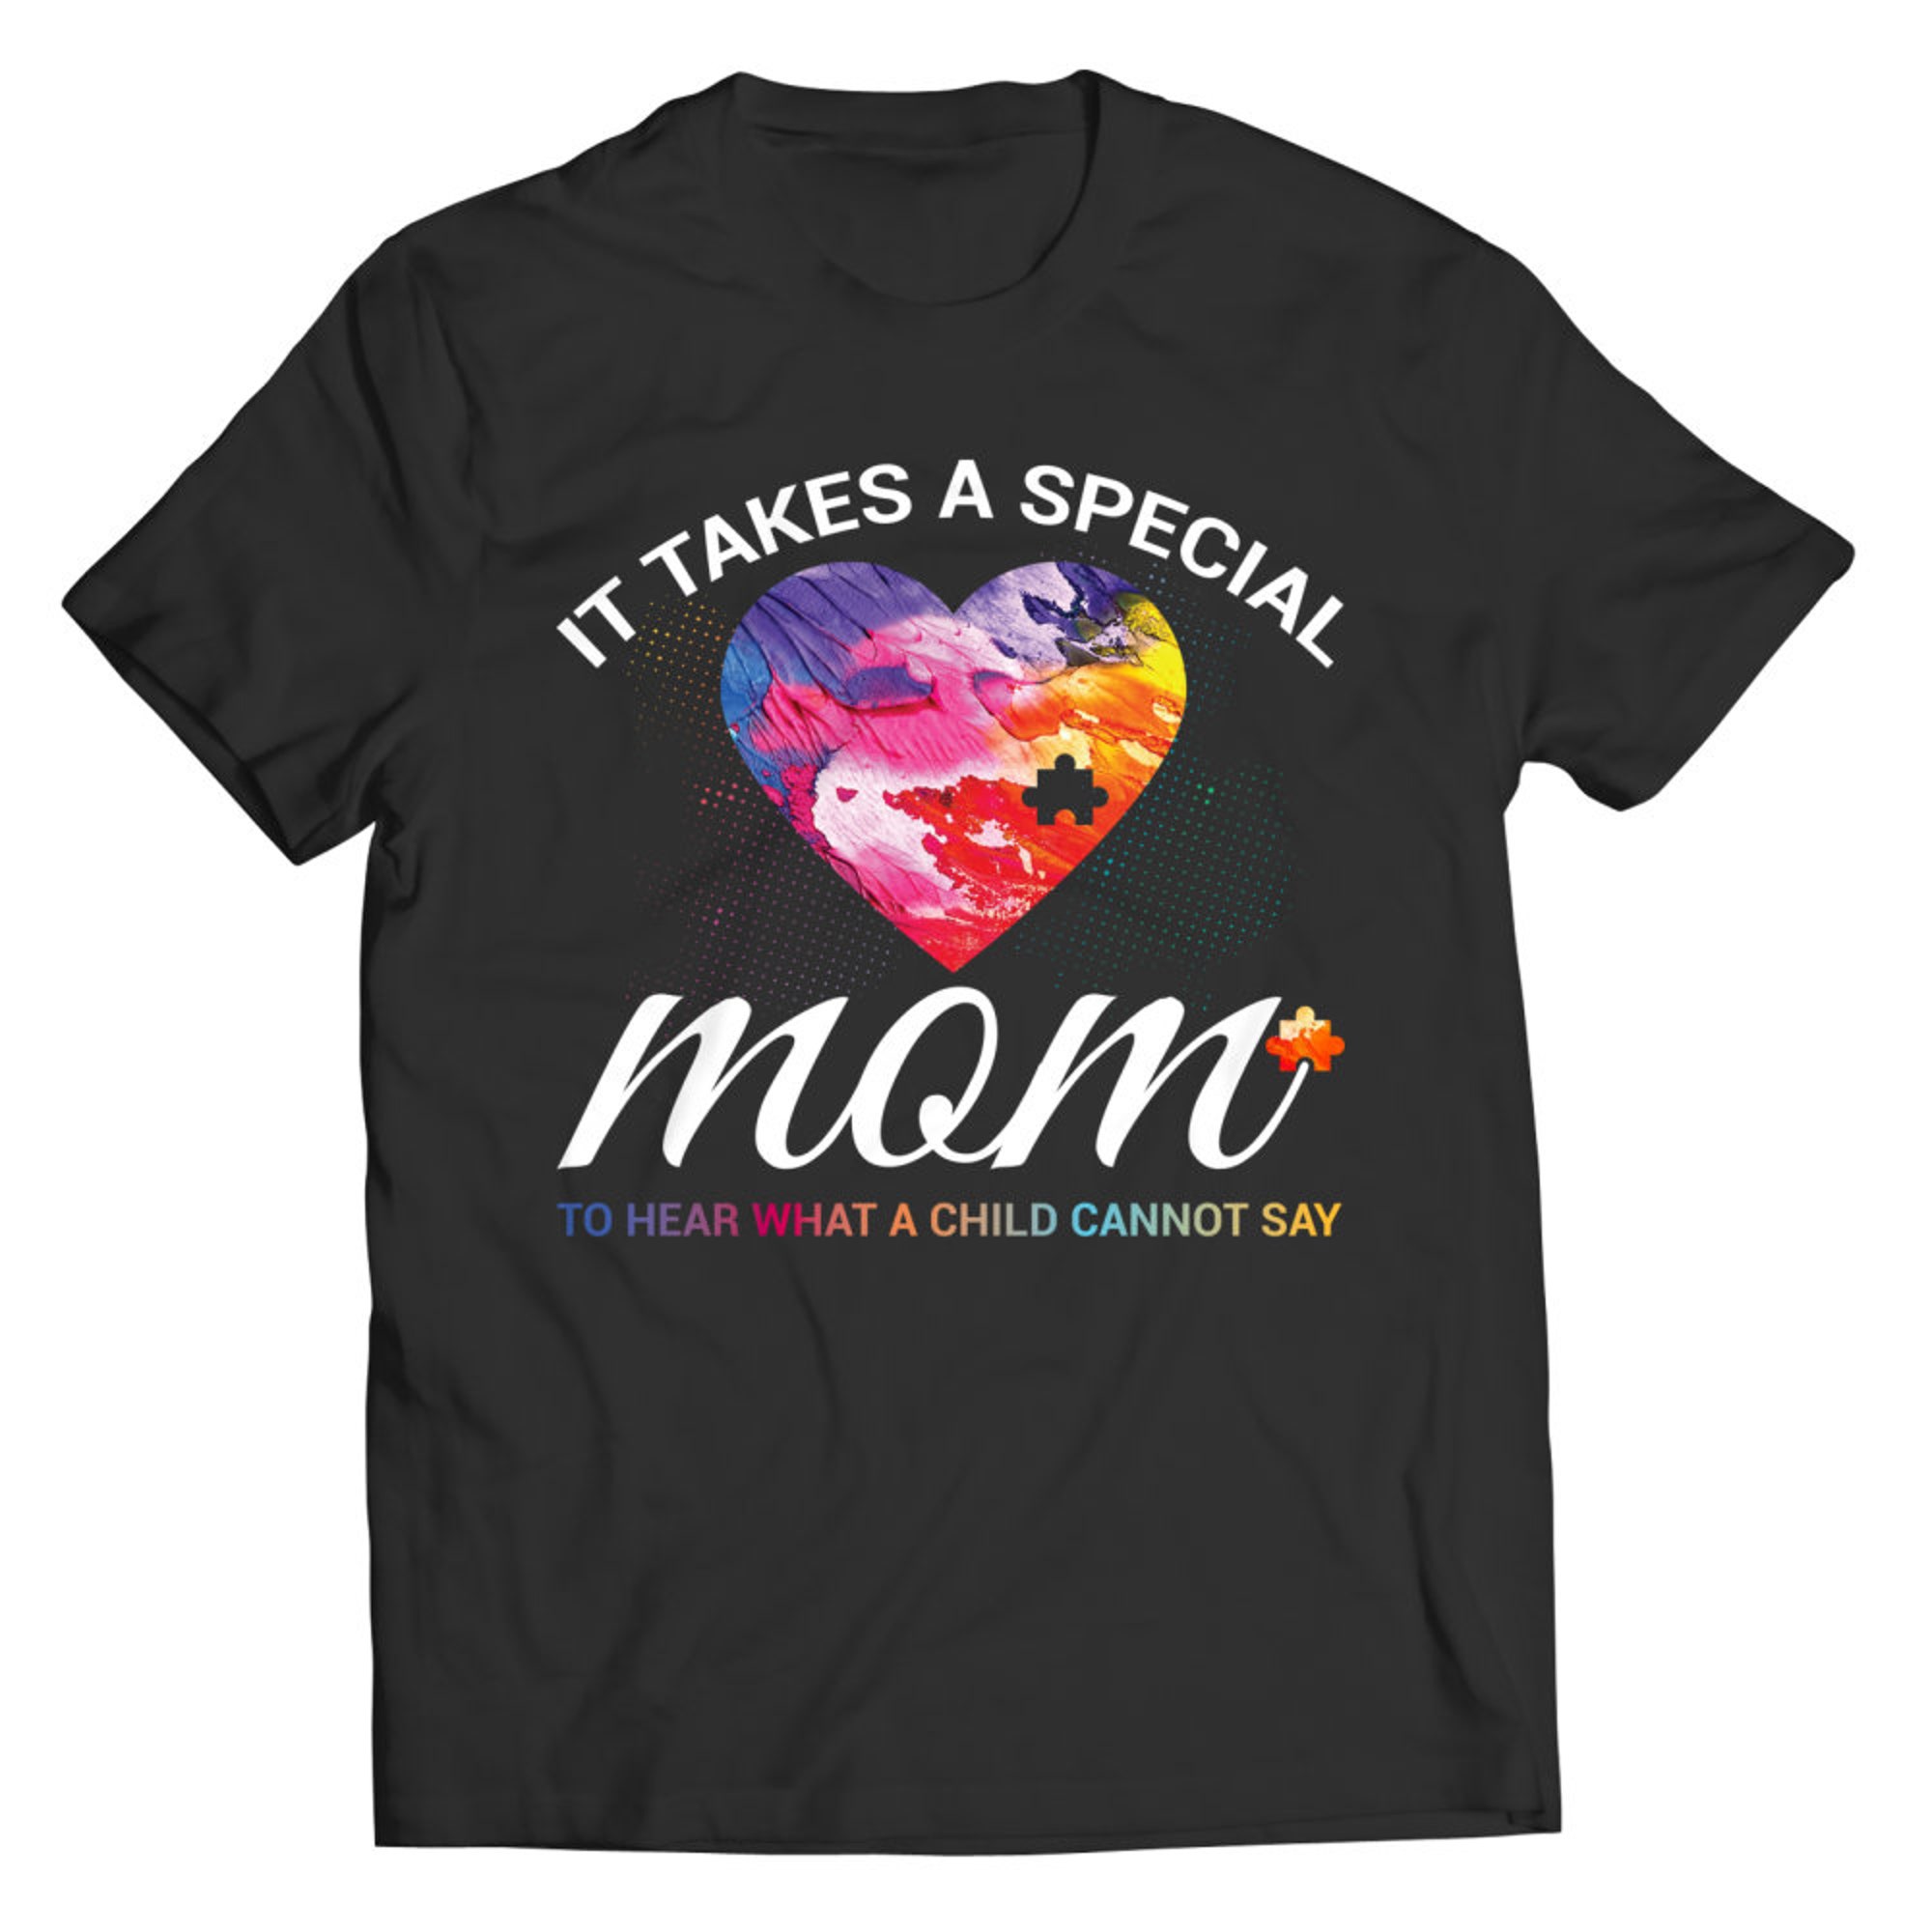 Discover It Takes A Special Paraprofessional To Hear What A Child Cannot Say T-shirt